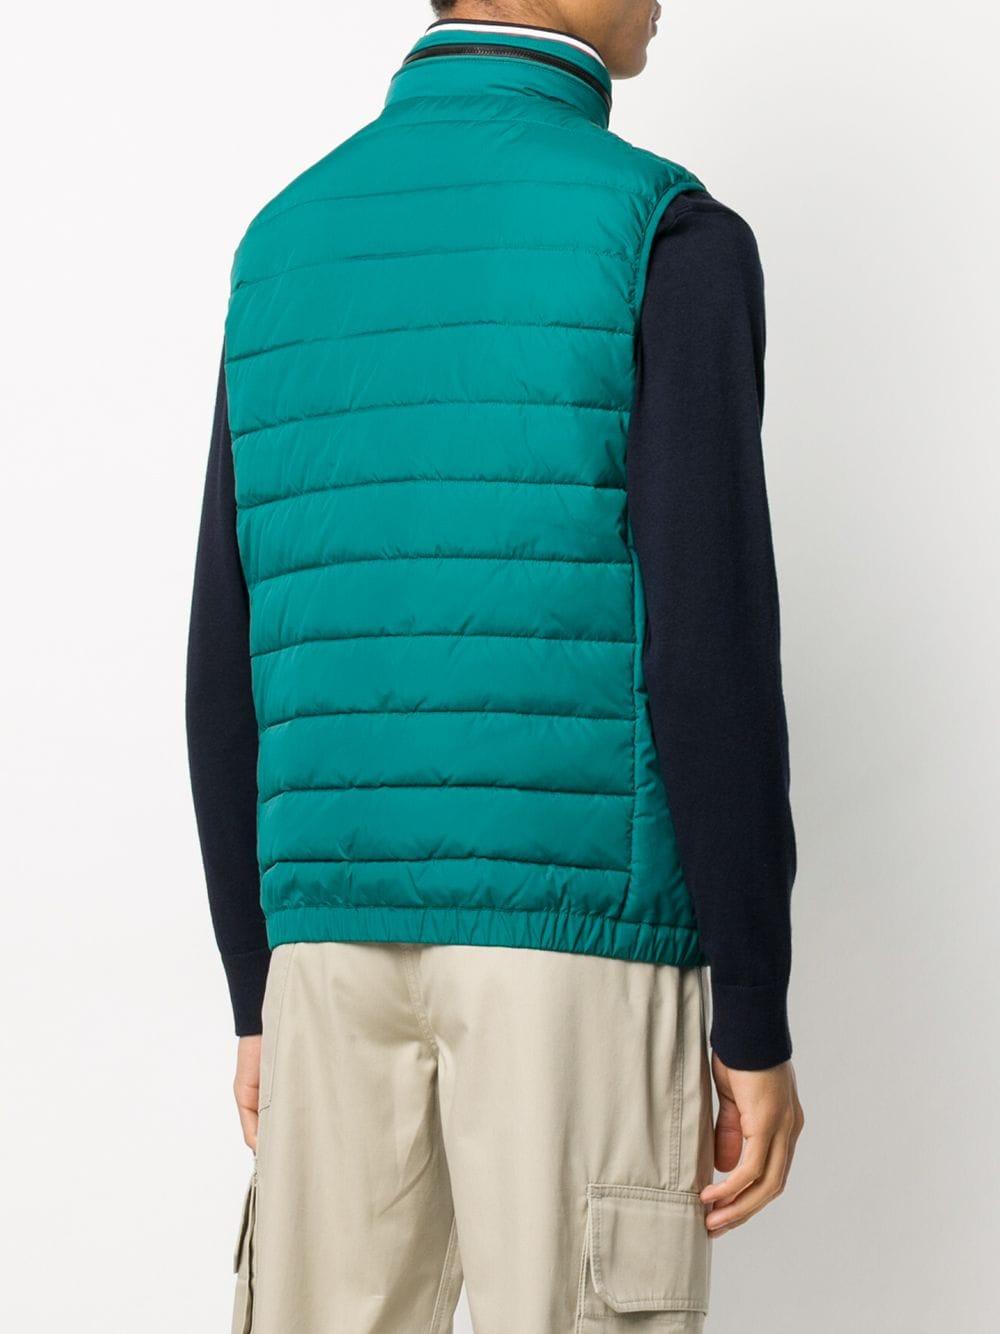 Tommy Hilfiger Padded Hooded Gilet in Green for Men - Lyst